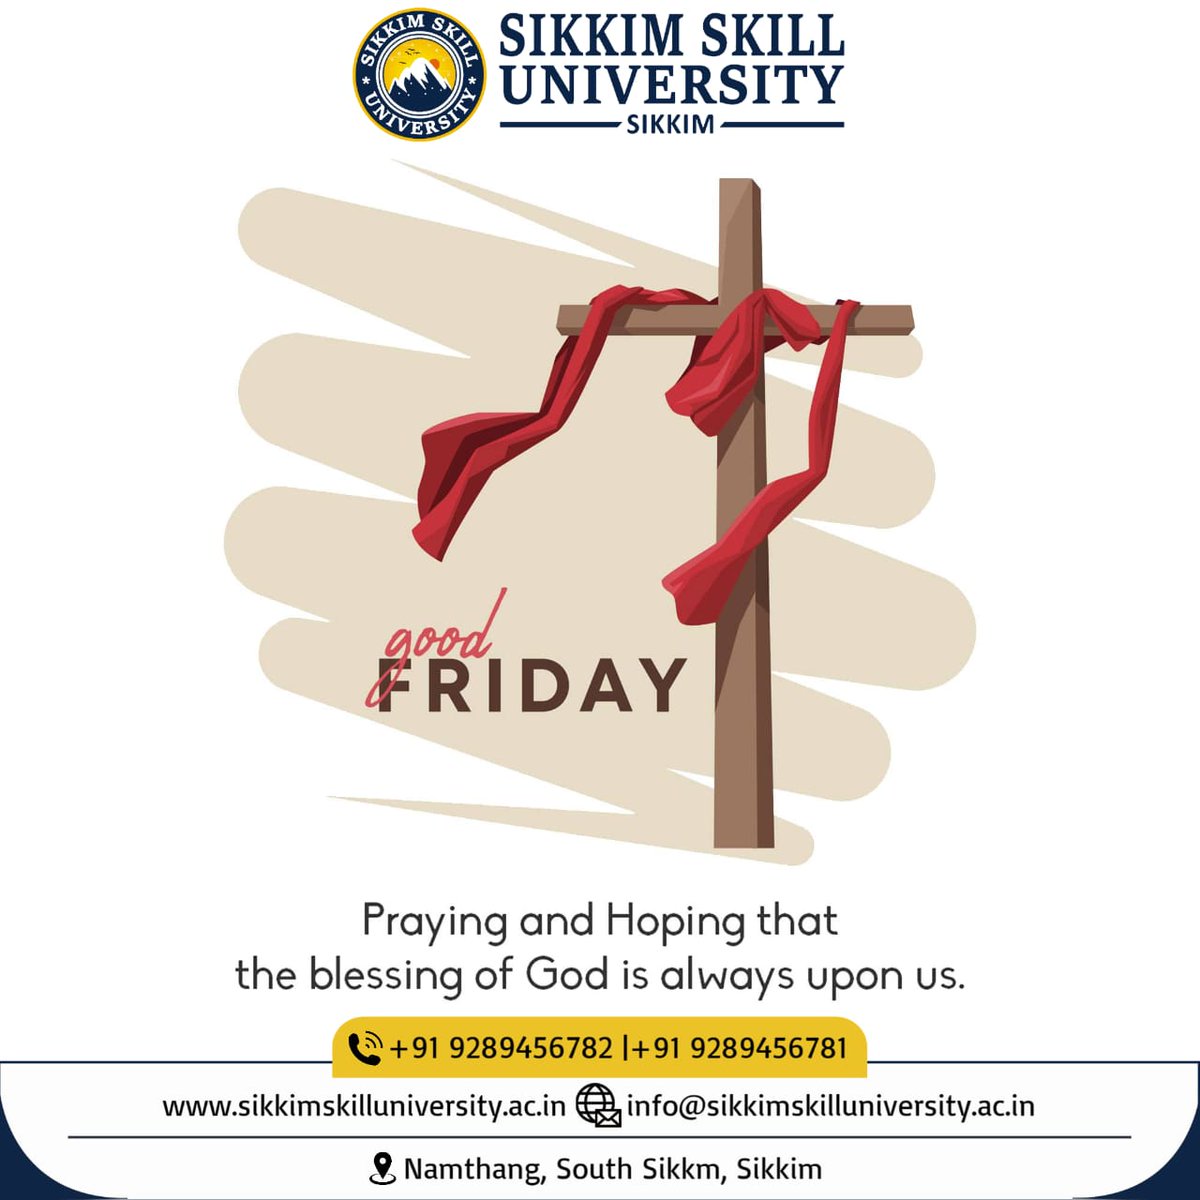 Amidst the solemnity of this day, may we find solace in the promise of renewal and redemption. 'Embracing the depth of love and sacrifice. #GoodFridayGrace #sikkimskilluniversity #namthang #southsikkim #sikkim